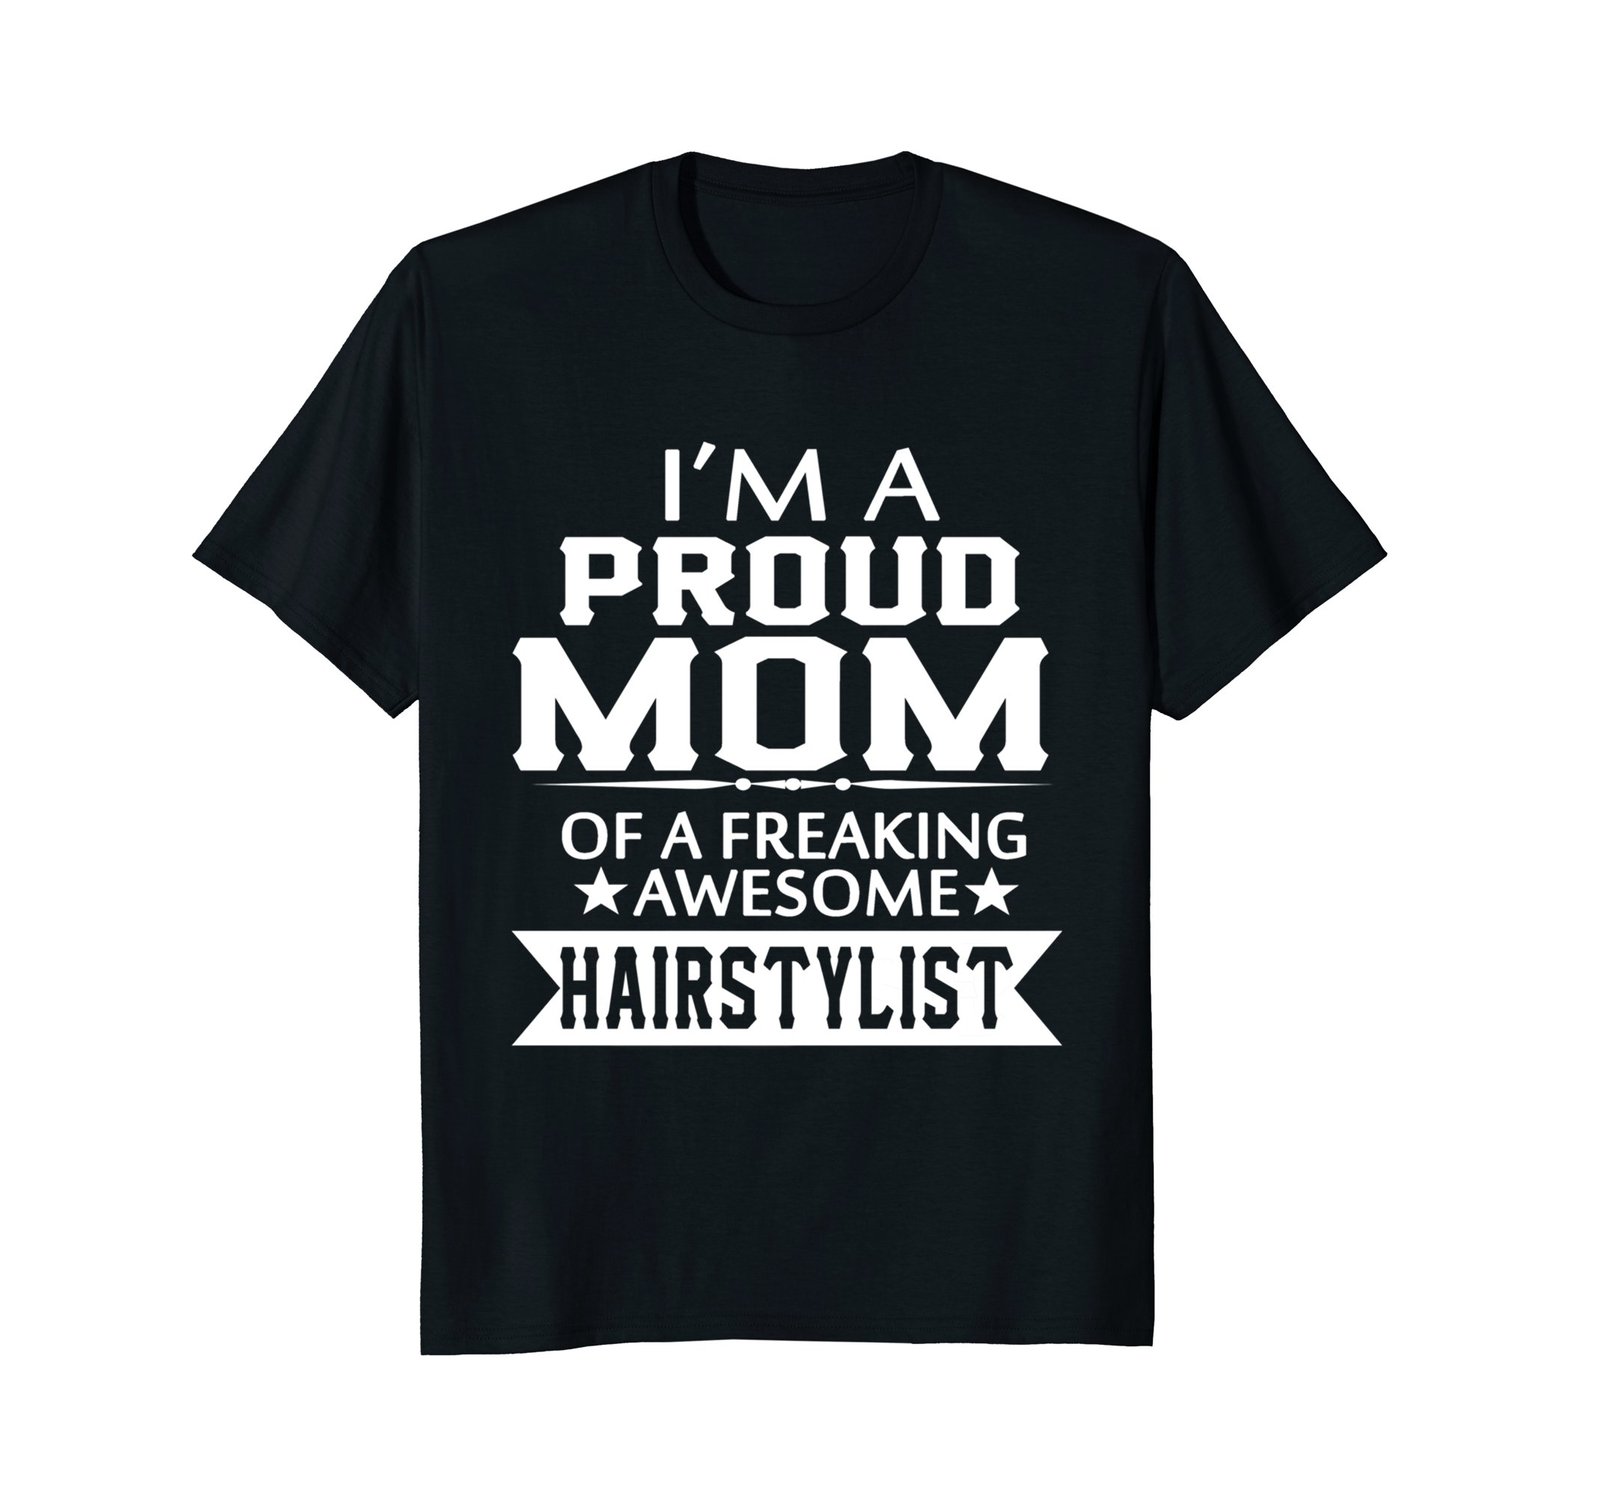 Download Funny Shirts - I'm A Proud Mom Of A Freaking Awesome ...